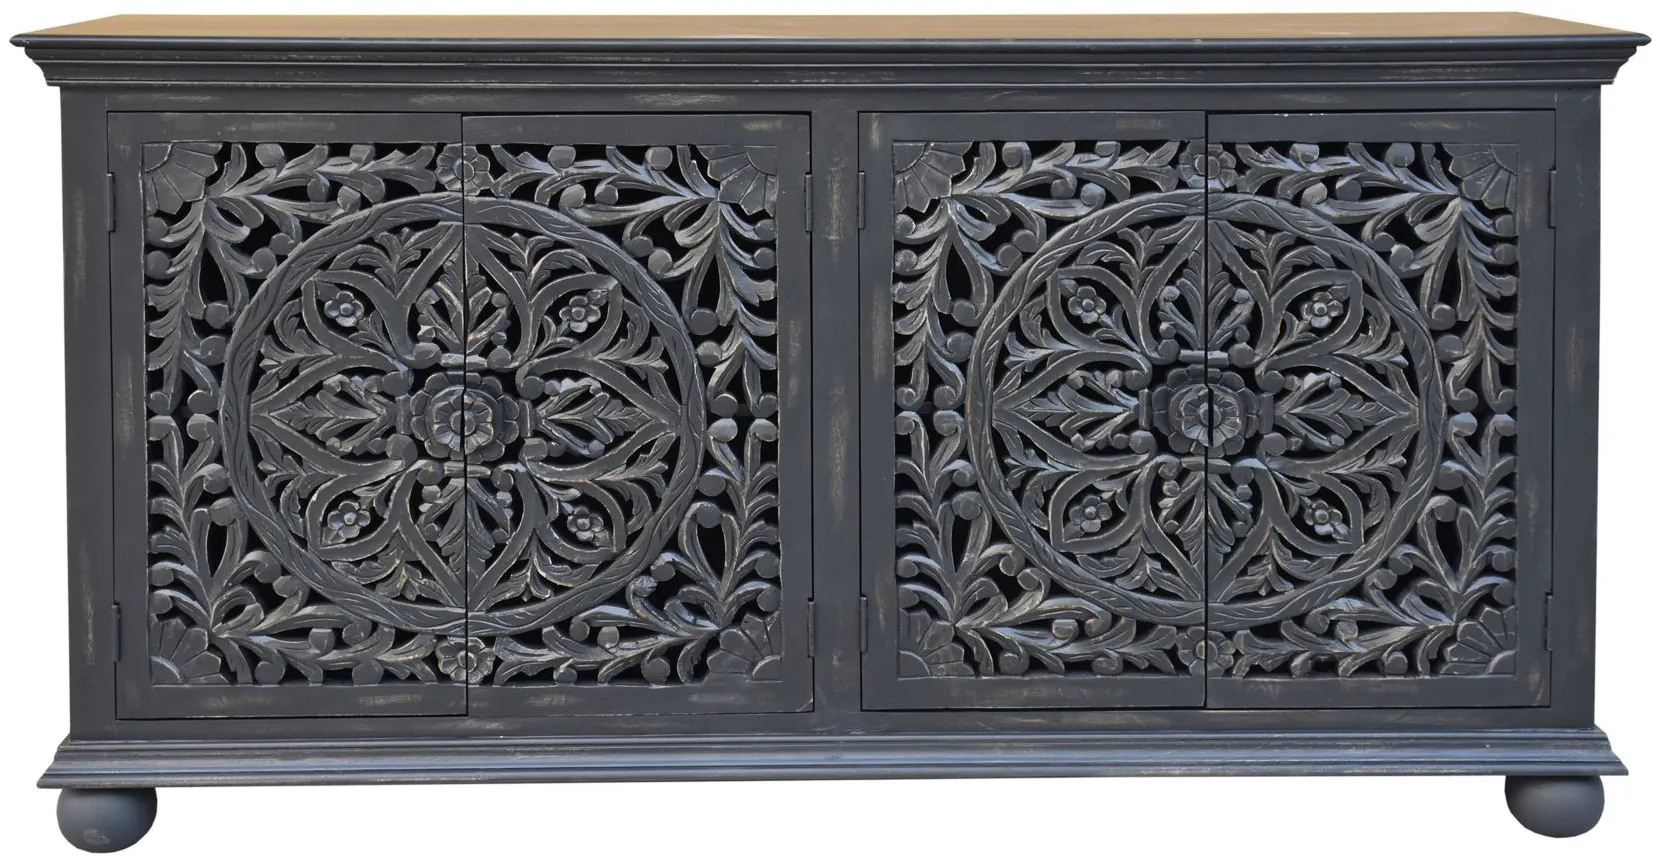 Brink Credenza in Distressed Black by Coast To Coast Imports